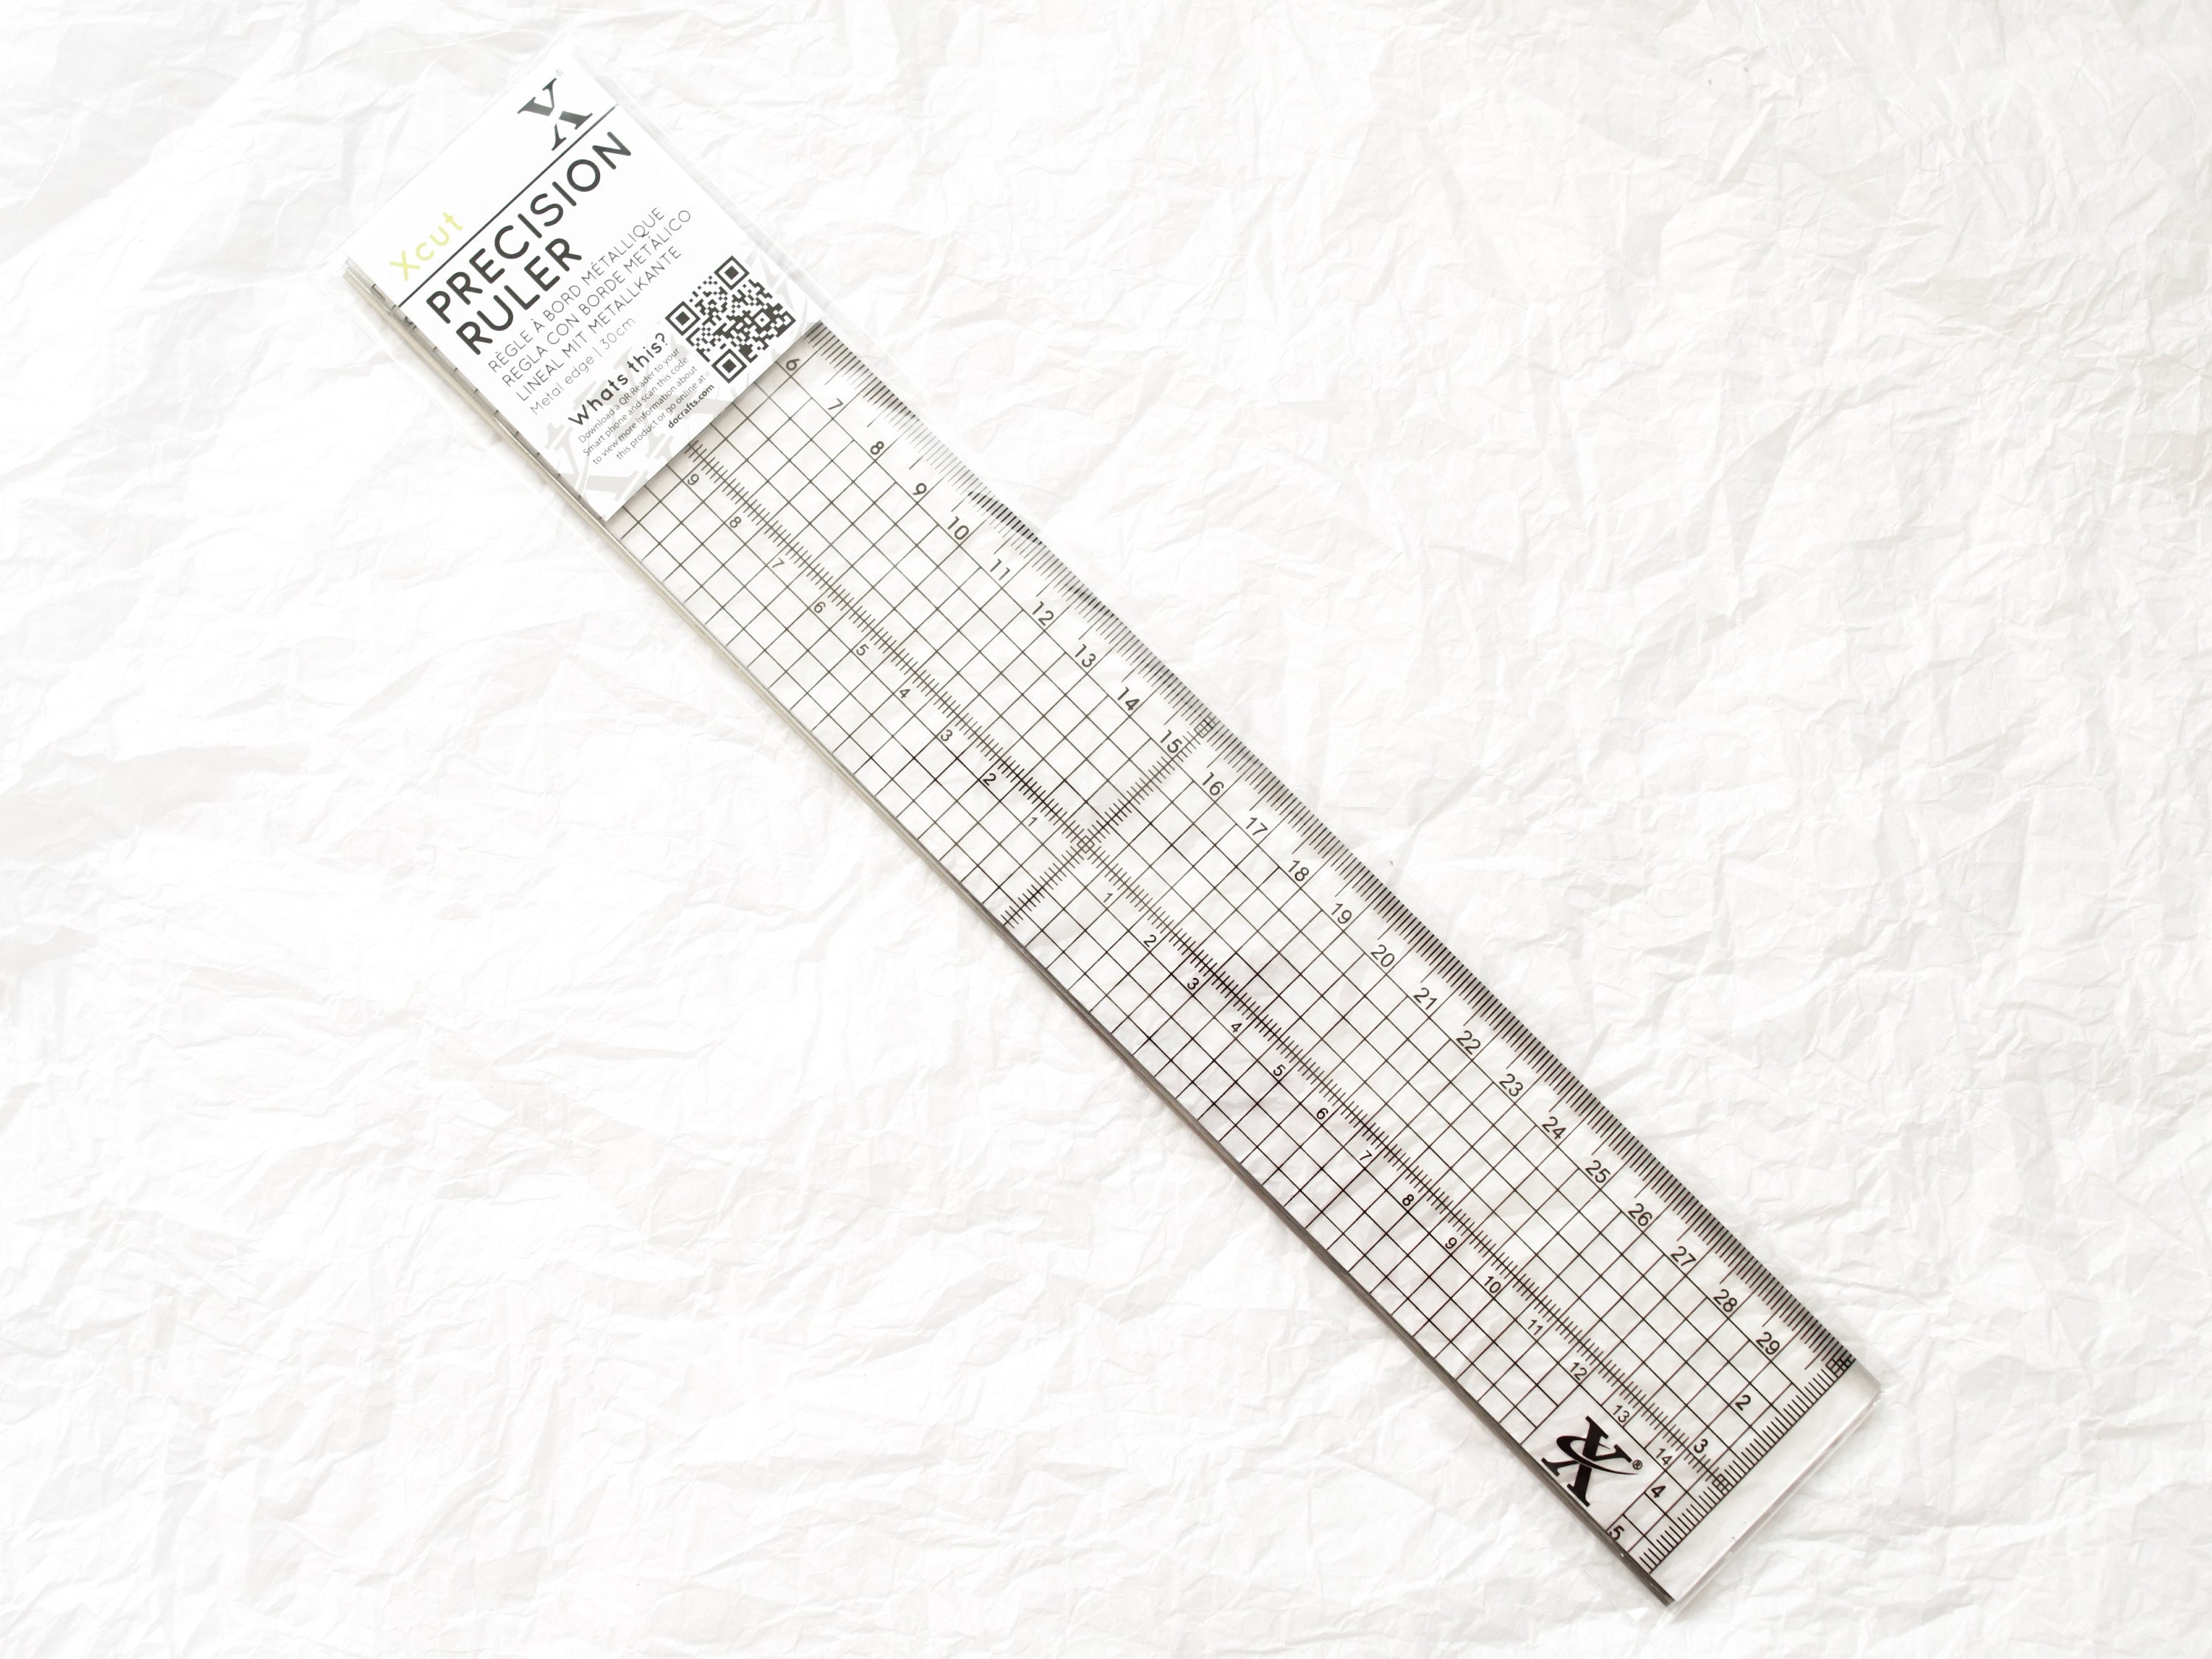 Xcut 30cm Clear Precision Ruler With Metal Cutting Edge Inlay 5cm Wide 